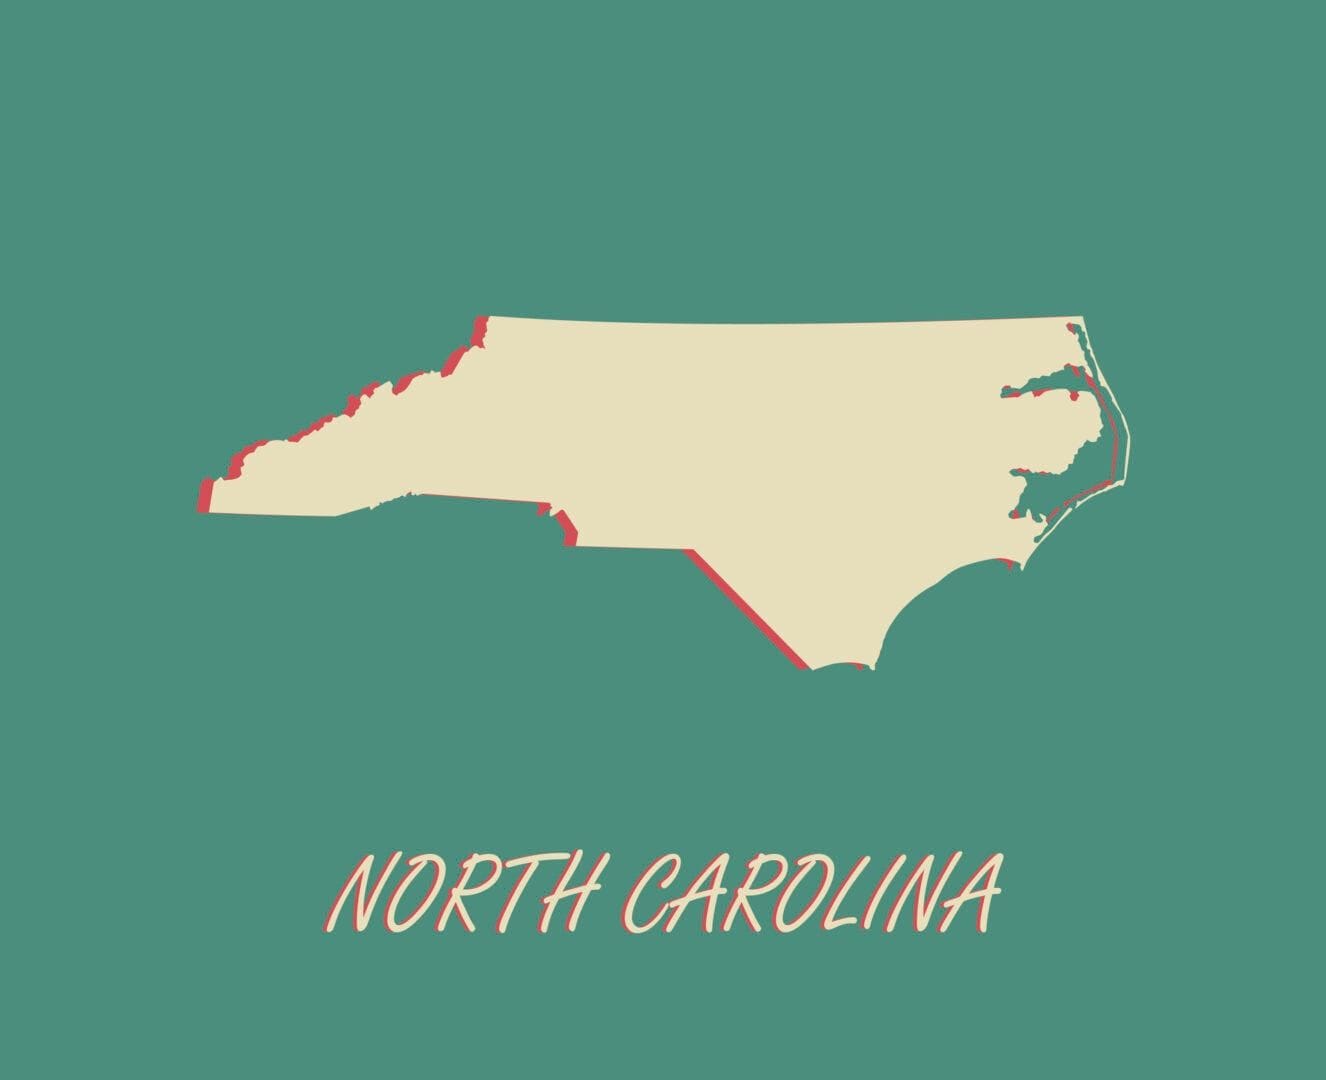 North Carolina household employment tax and labor law guide - Care.com